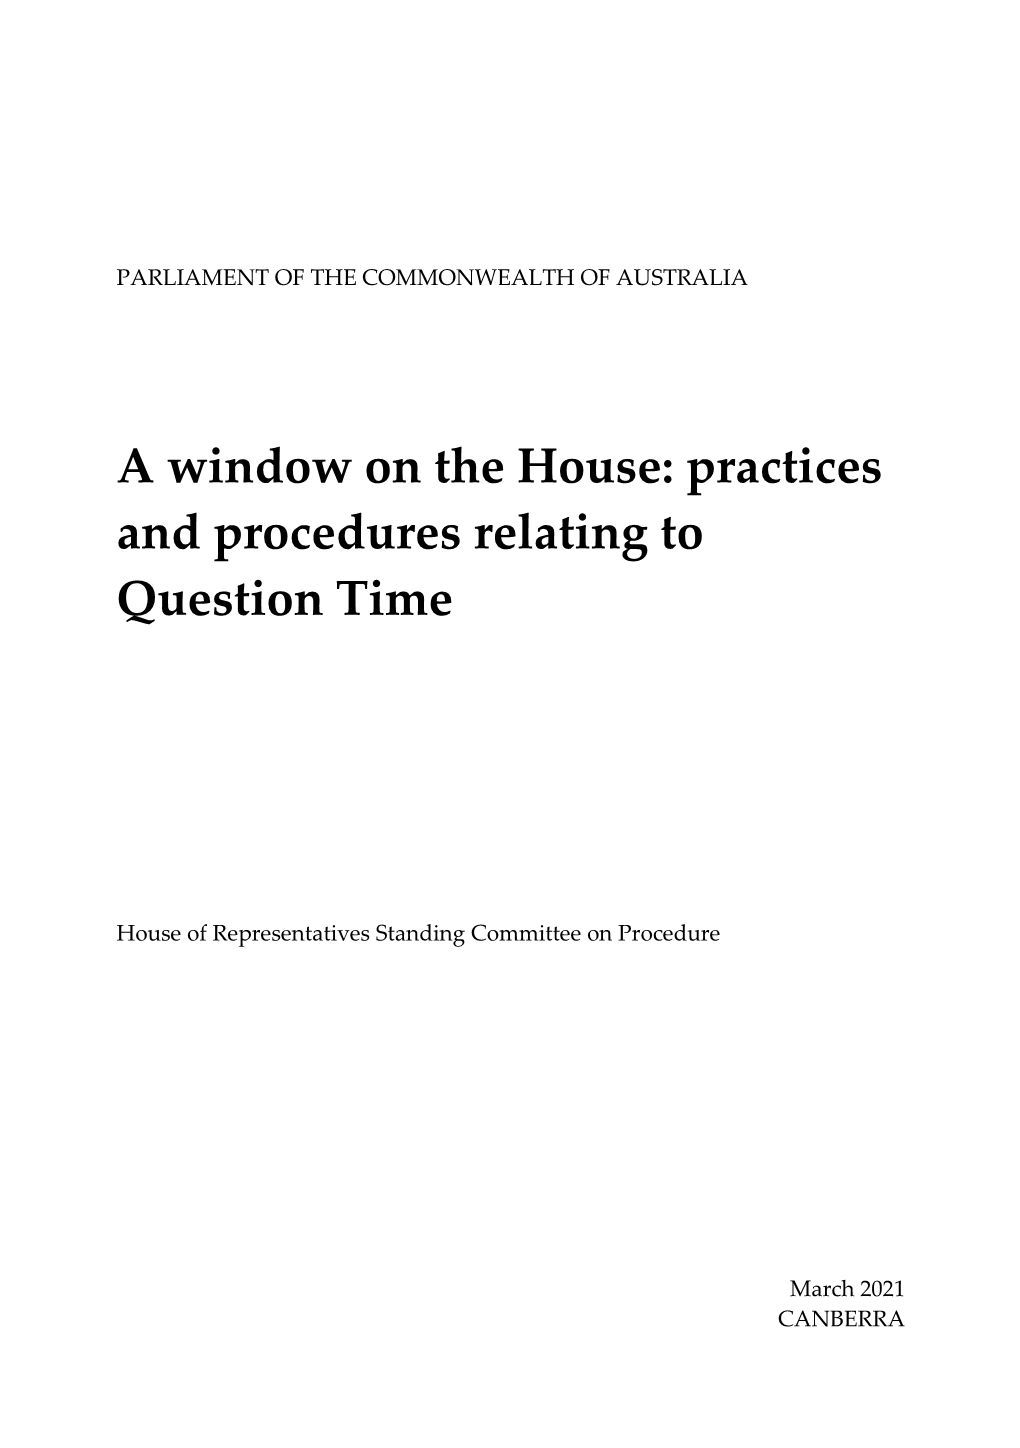 Practices and Procedures Relating to Question Time